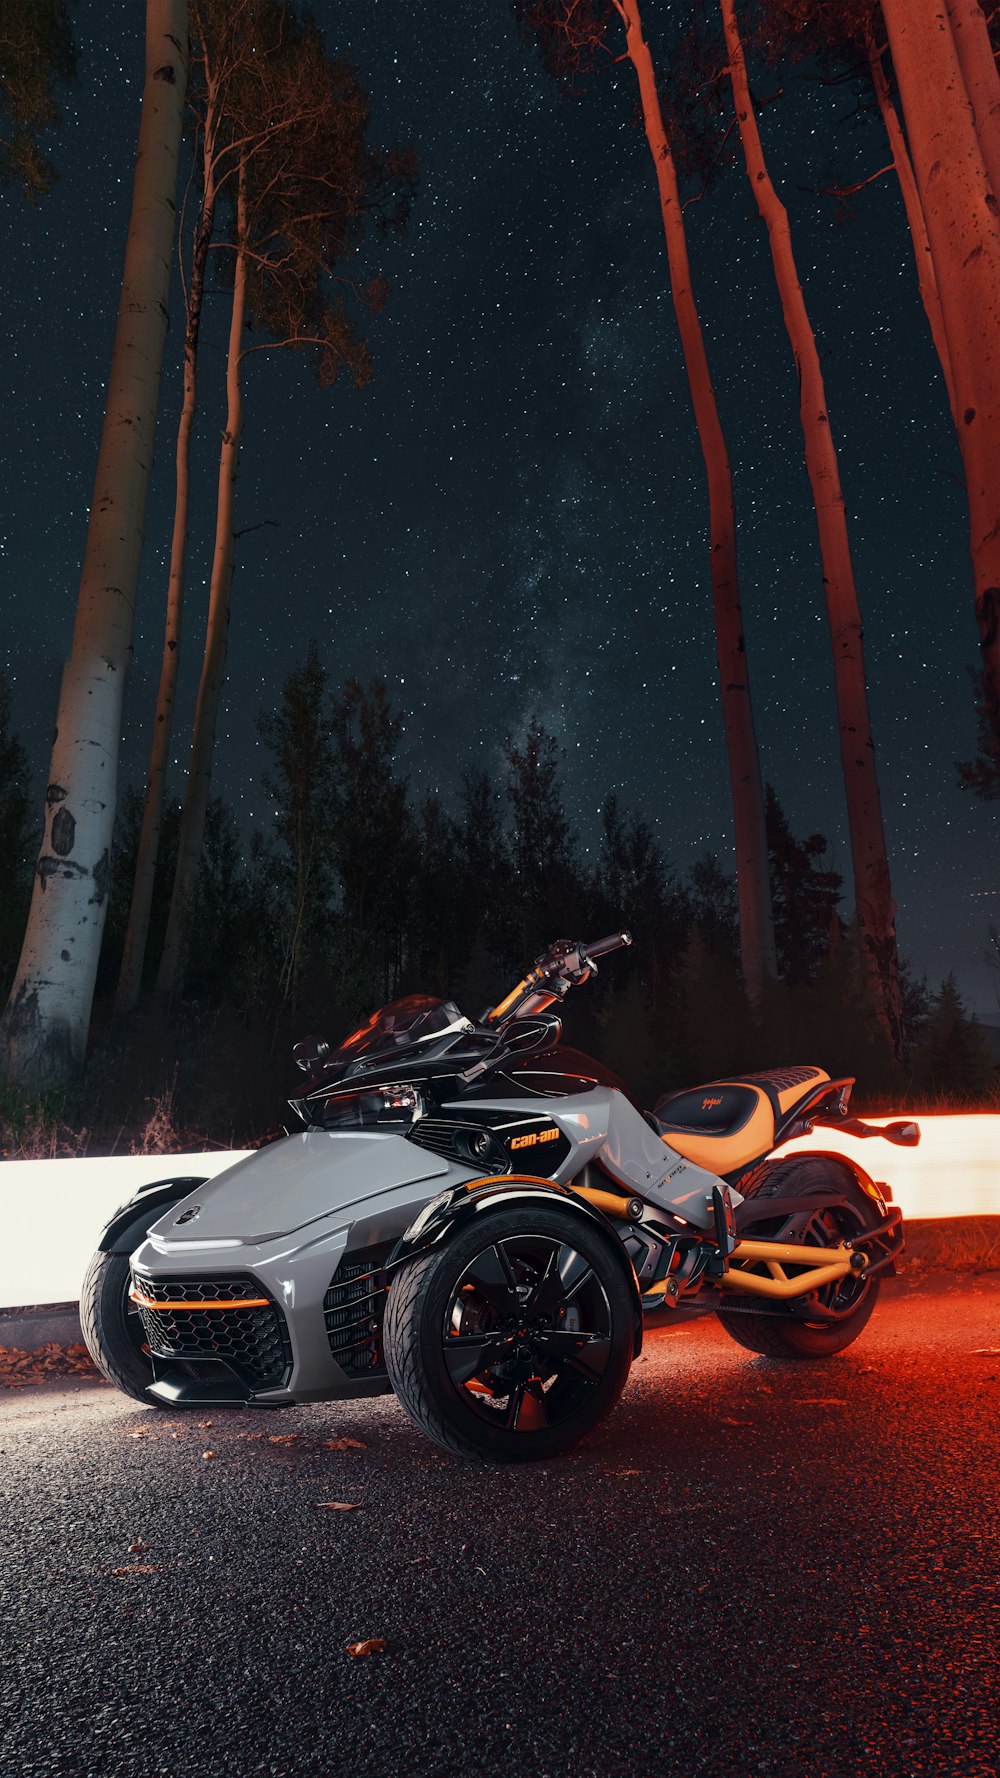 a motorcycle parked in front of a fire